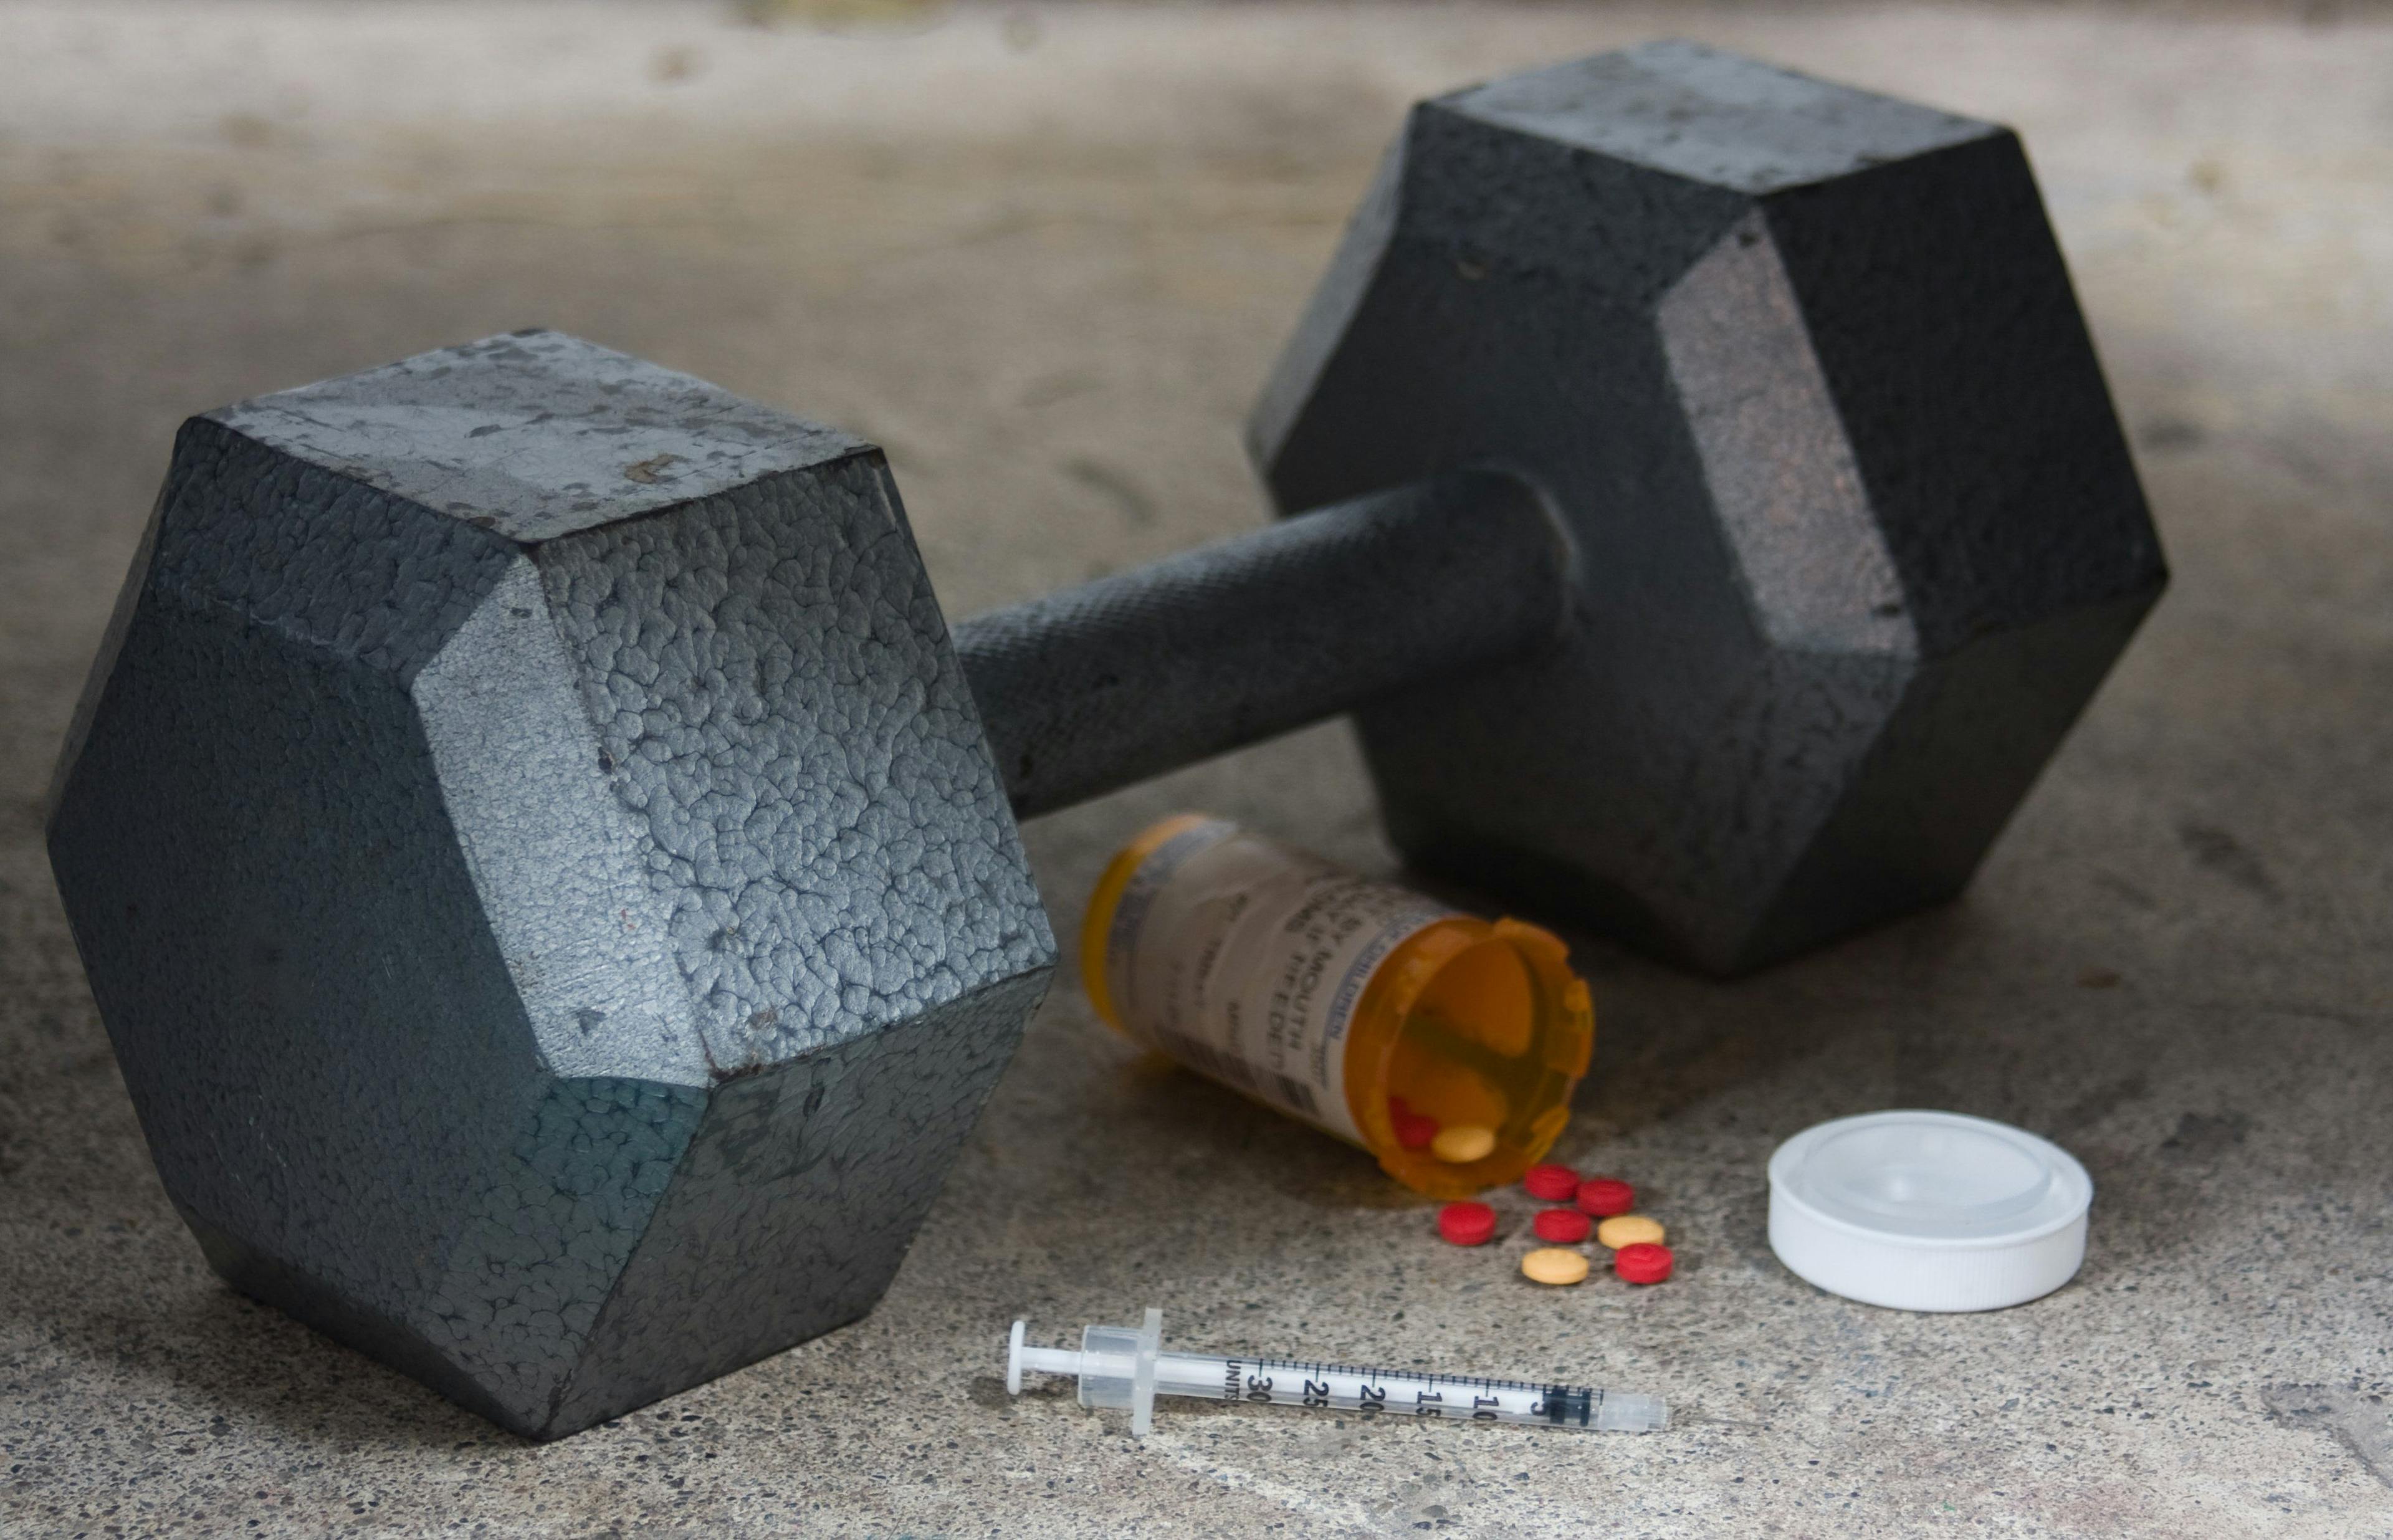 Talk with teens about performance-enhancing substances